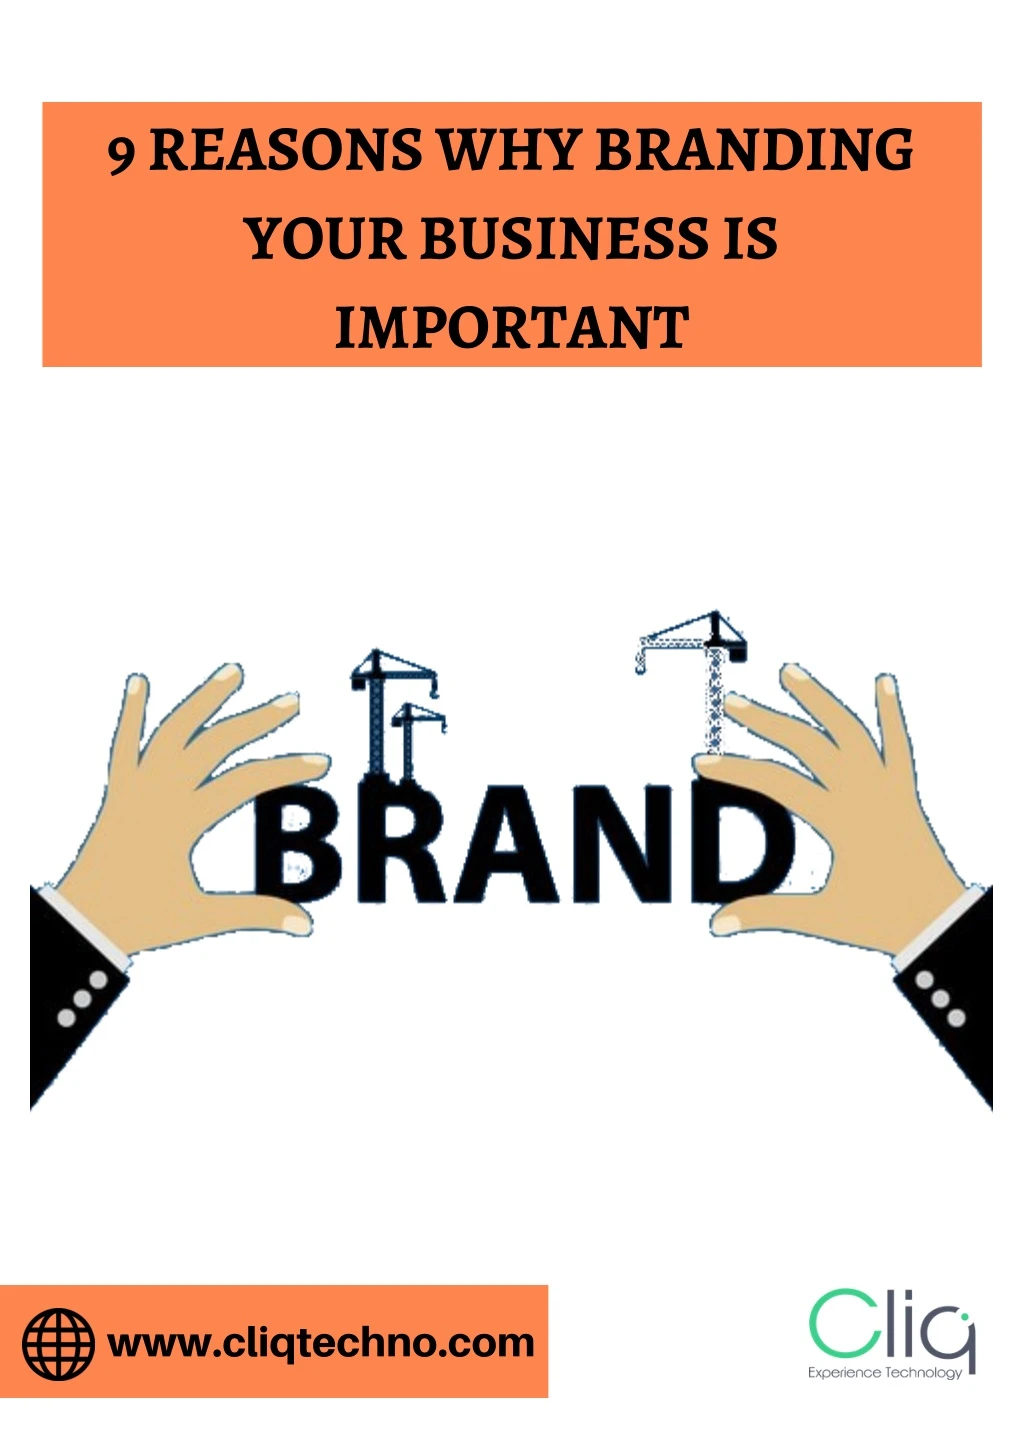 9 reasons why branding your business is important